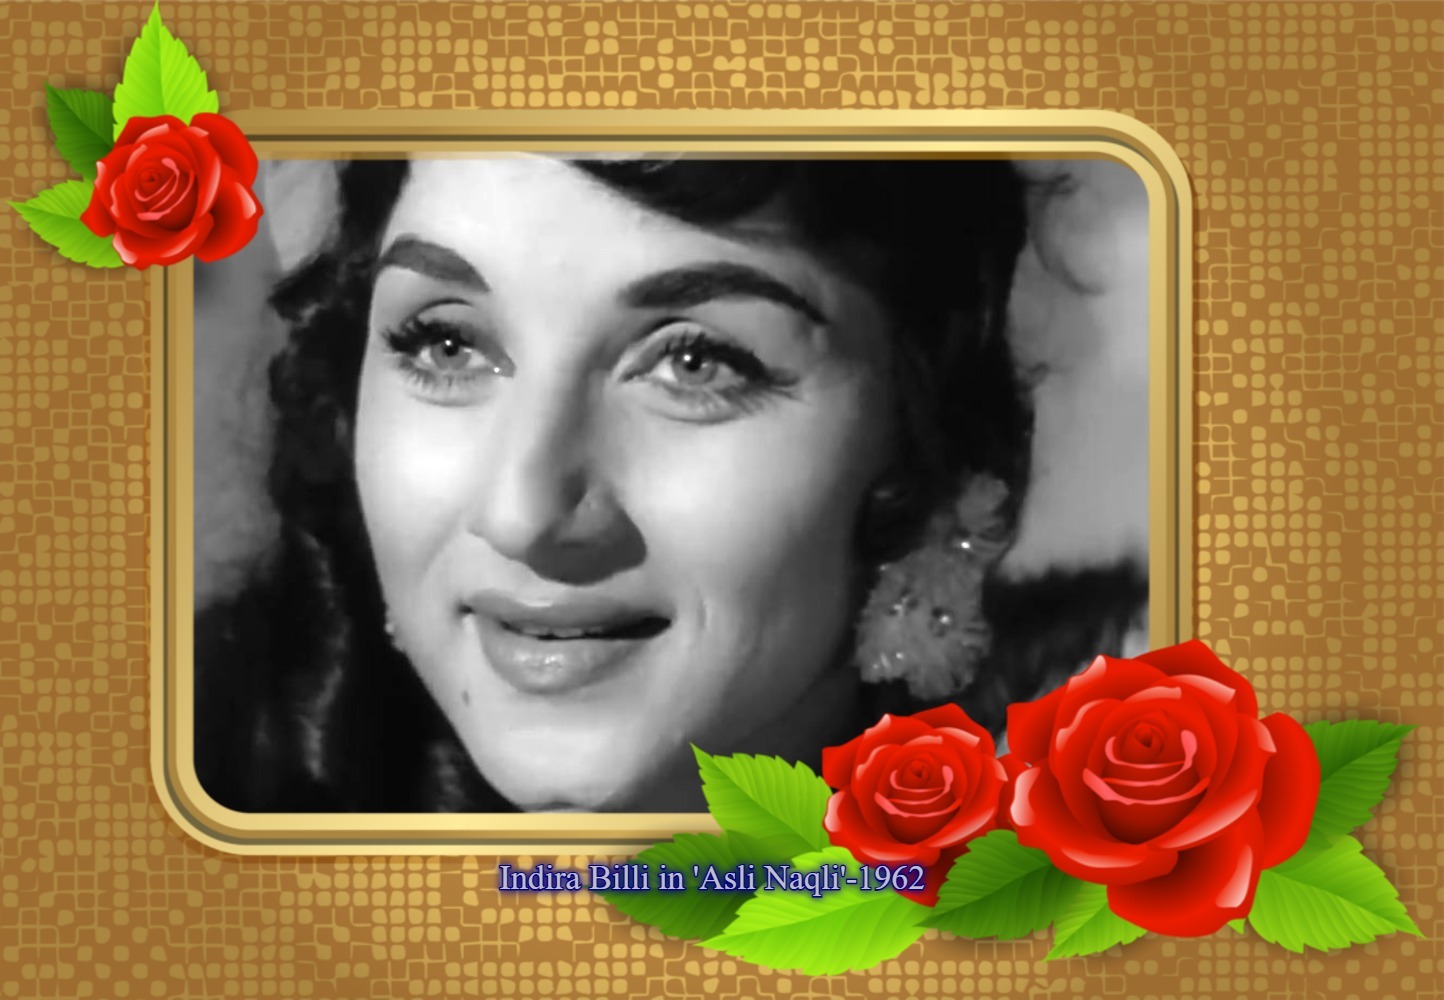 You are currently viewing “Indira Billi- The Actress Who Was Miscast in Hindi Films”